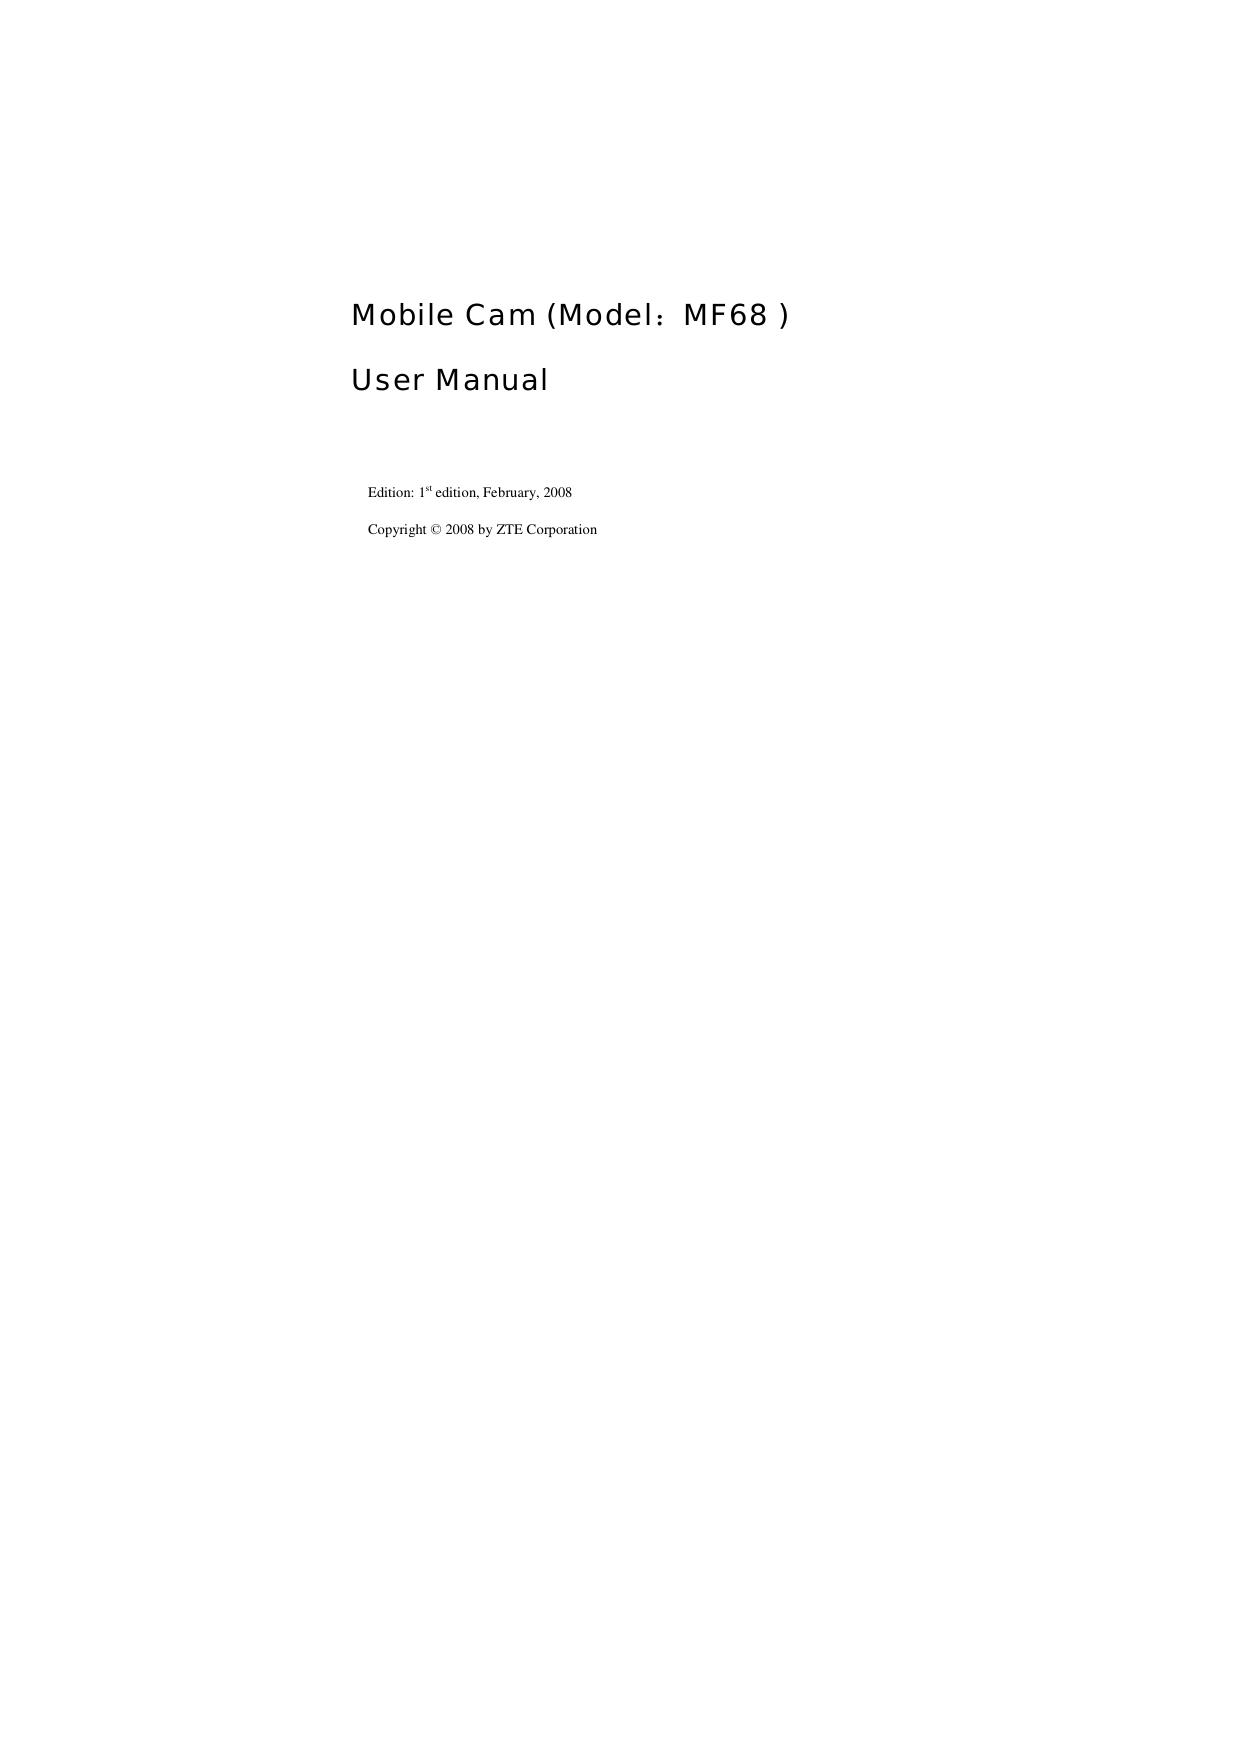     Mobile Cam (Model：MF68 ) User Manual   Edition: 1st edition, February, 2008 Copyright © 2008 by ZTE Corporation 